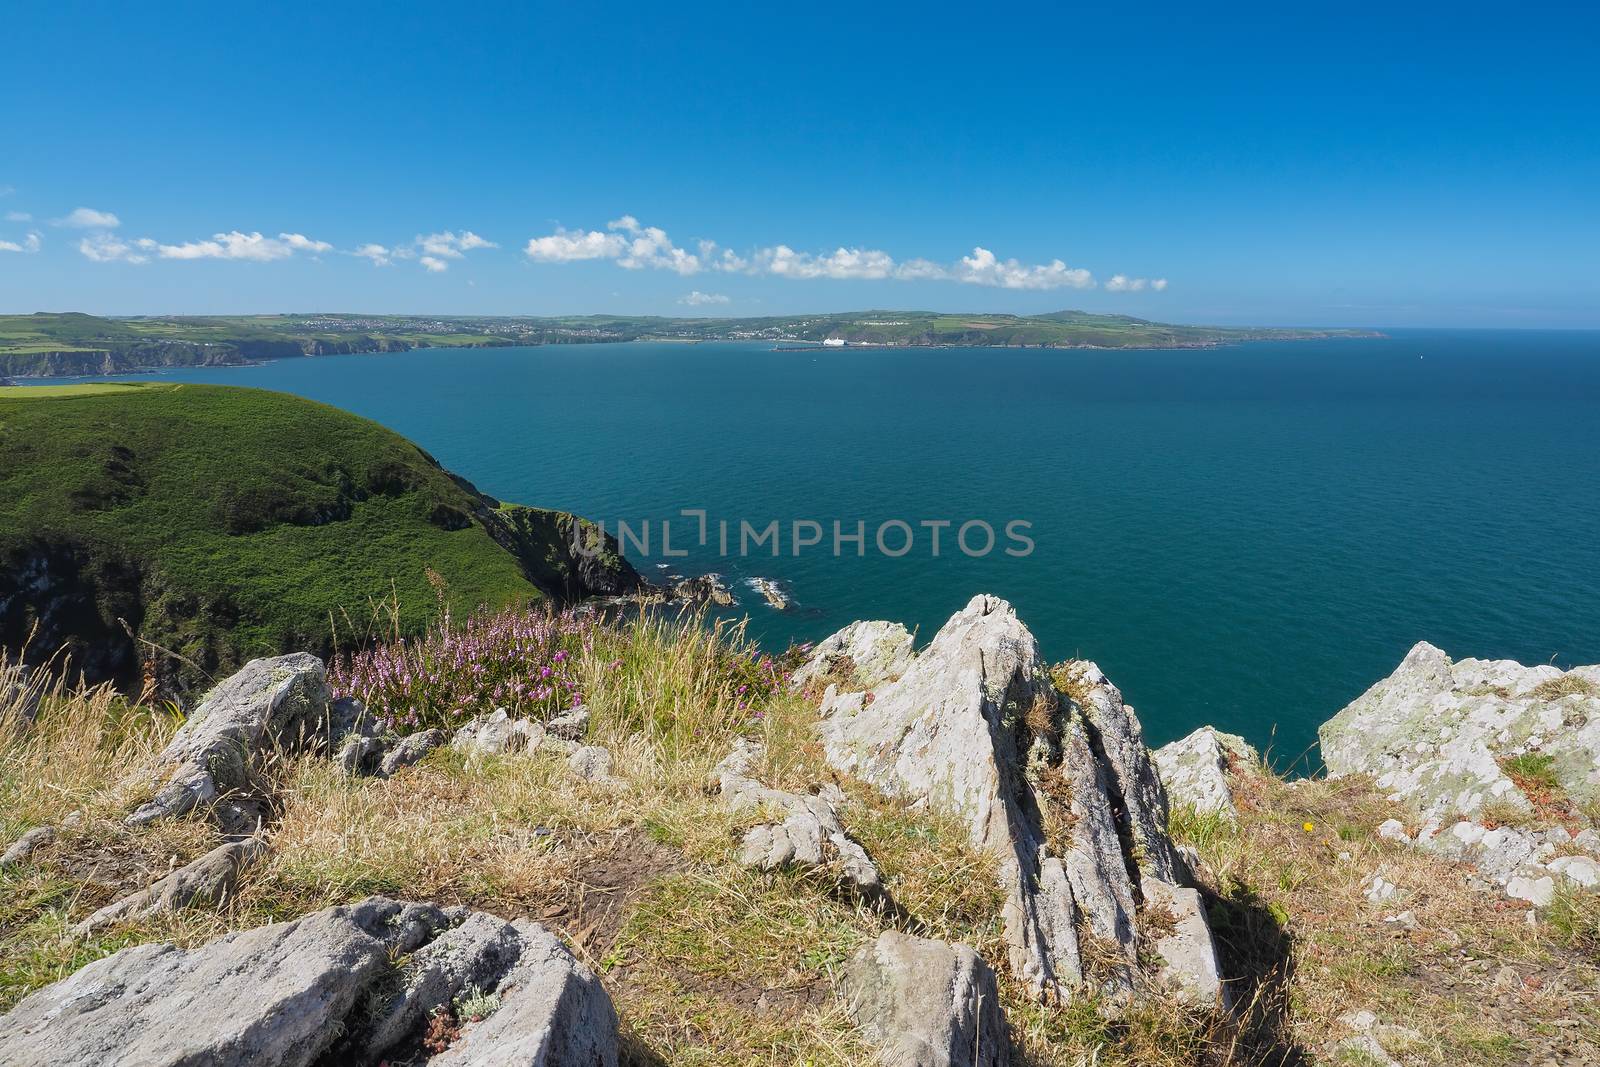 Exhilarating view from the top of Dinas Head on Dinas Island over the cliffs and coastline to Fishguard Harbour, Pembrokeshire Coast National Park, Wales, UK